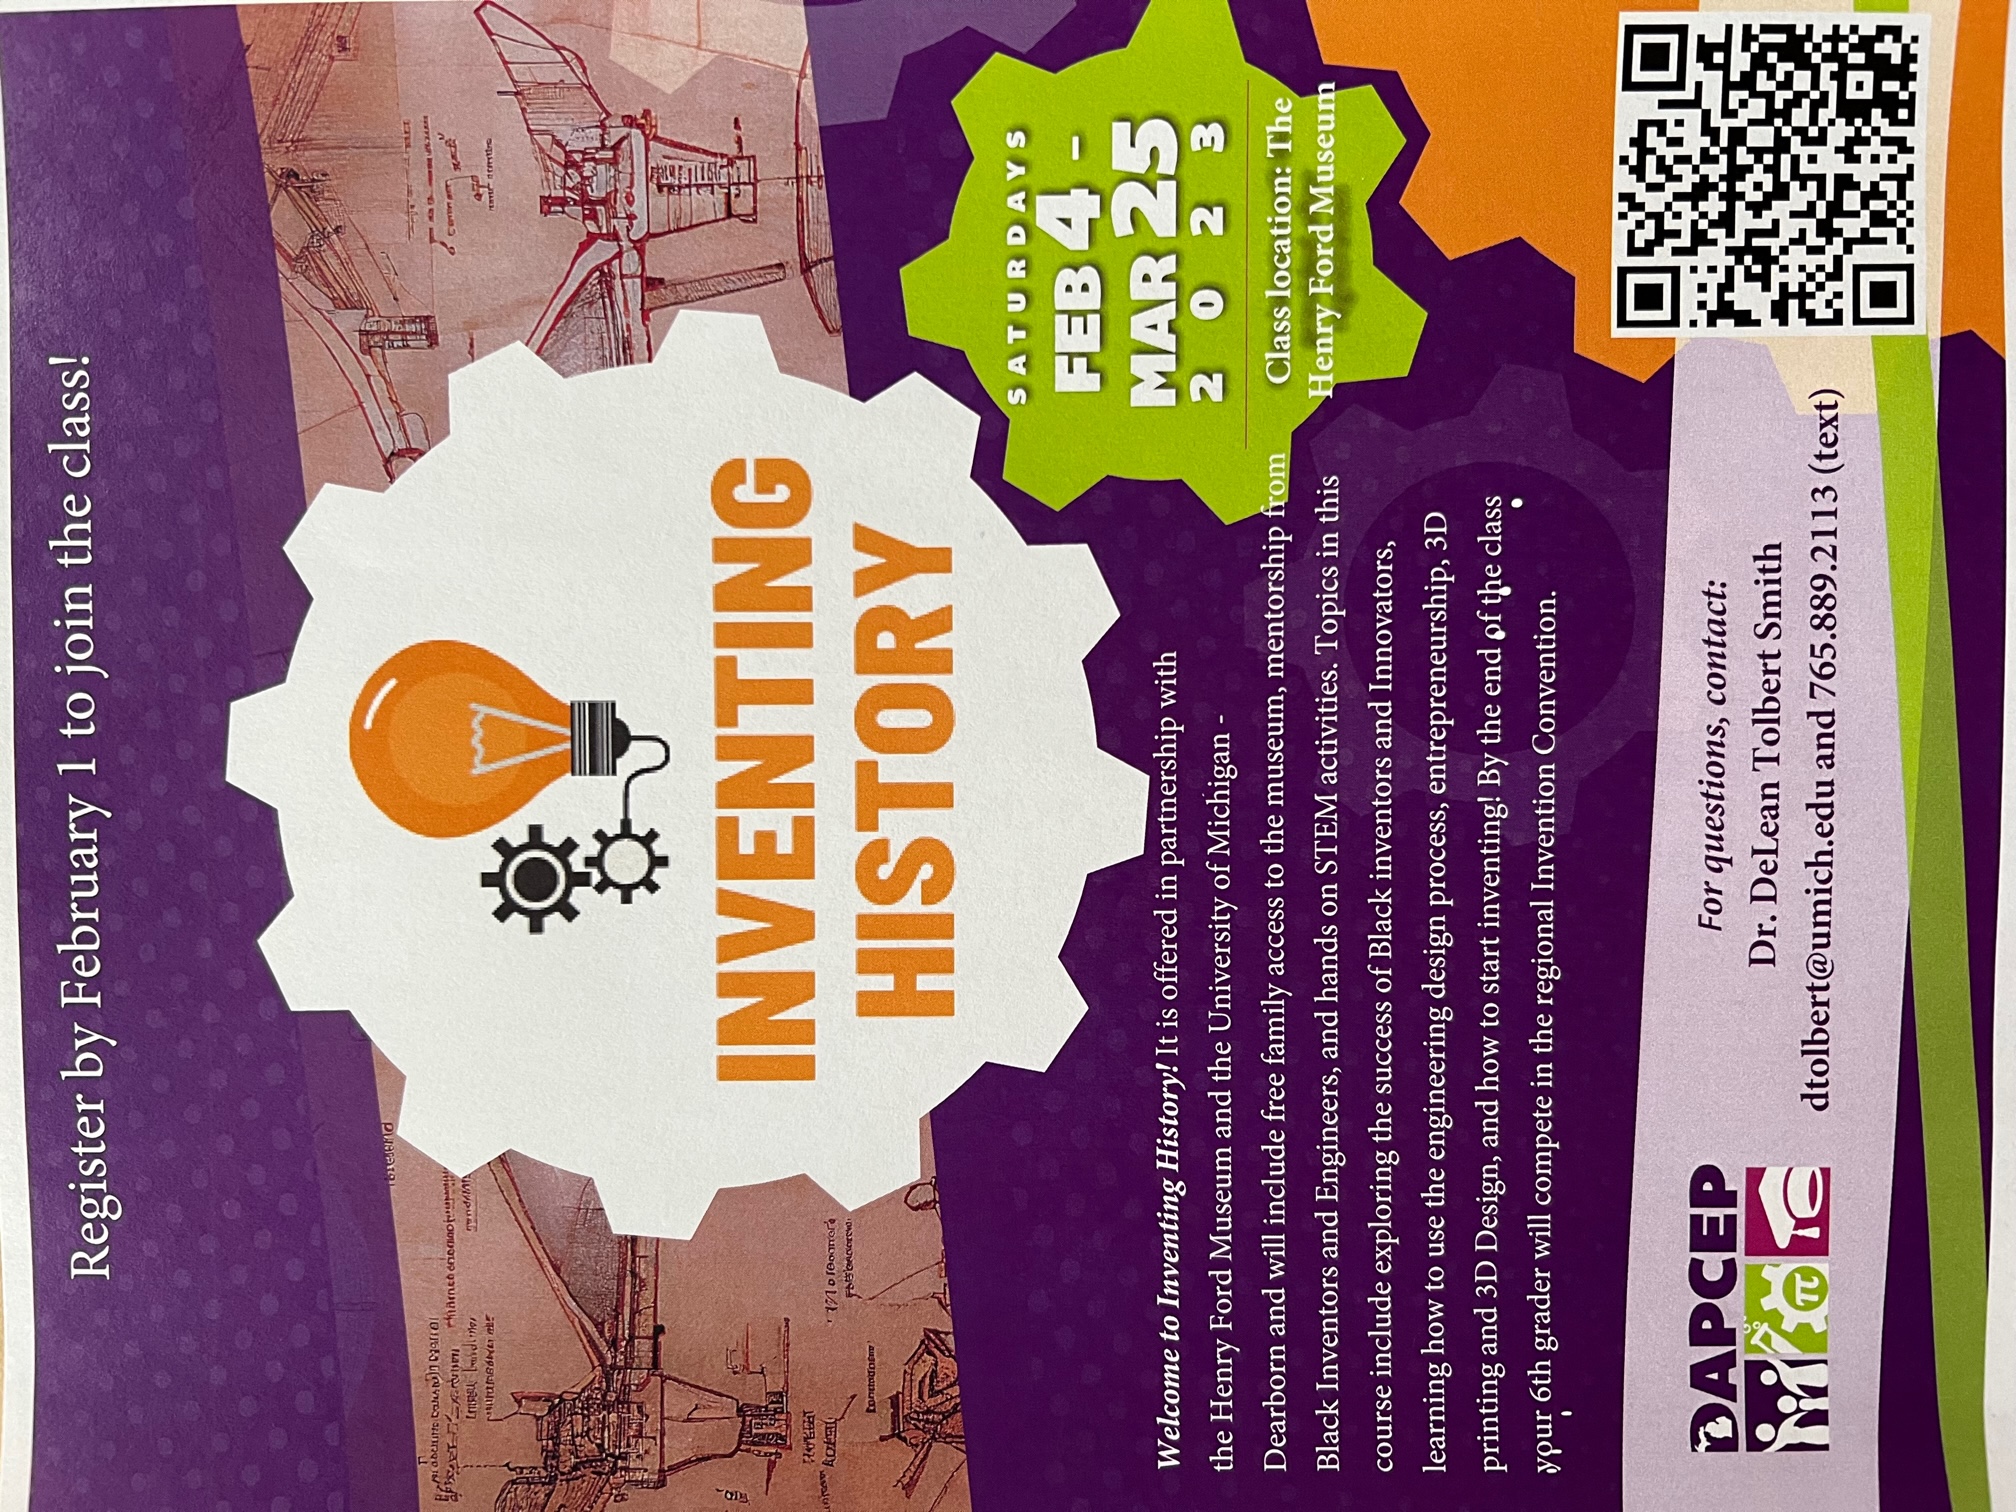 a flyer for "inventing history" a saturday class offered for 6th graders at the henry ford